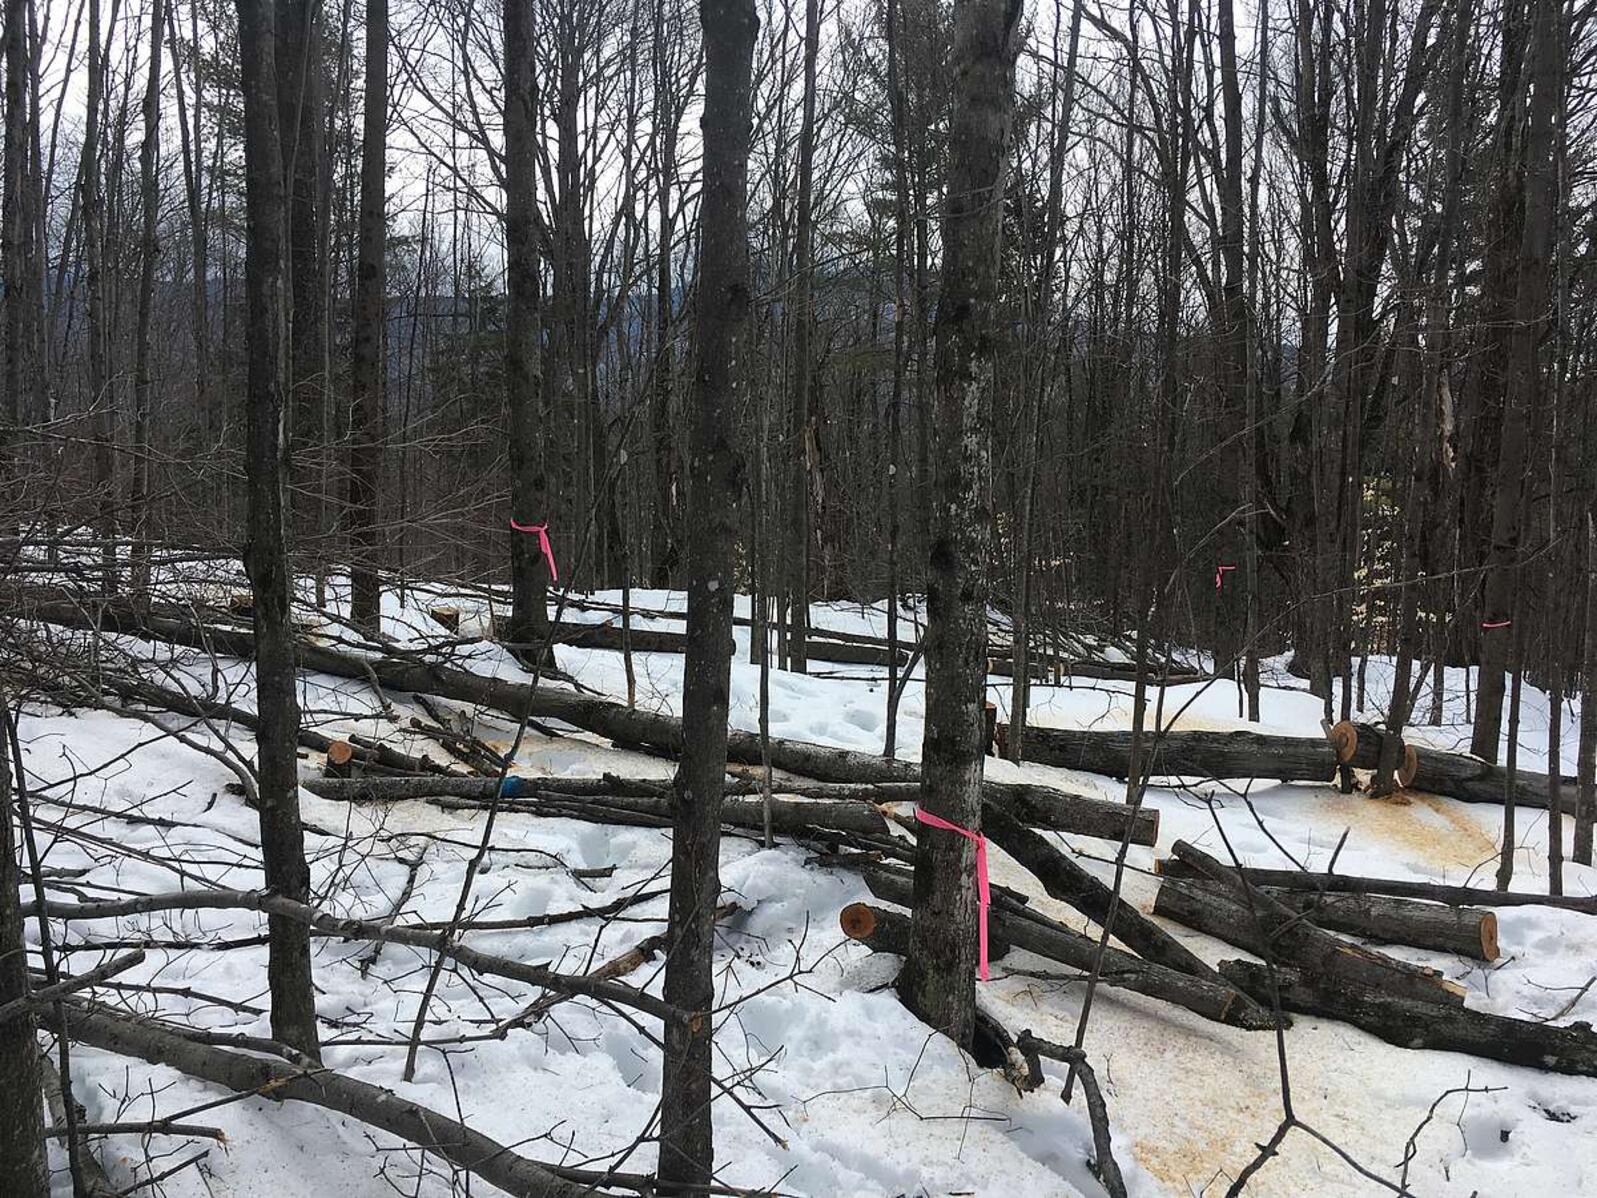 A stand of trees. Some are cut and sections of trunk lay on the ground. Two of the standing trees have pink flagging tape tied around their trunks. 